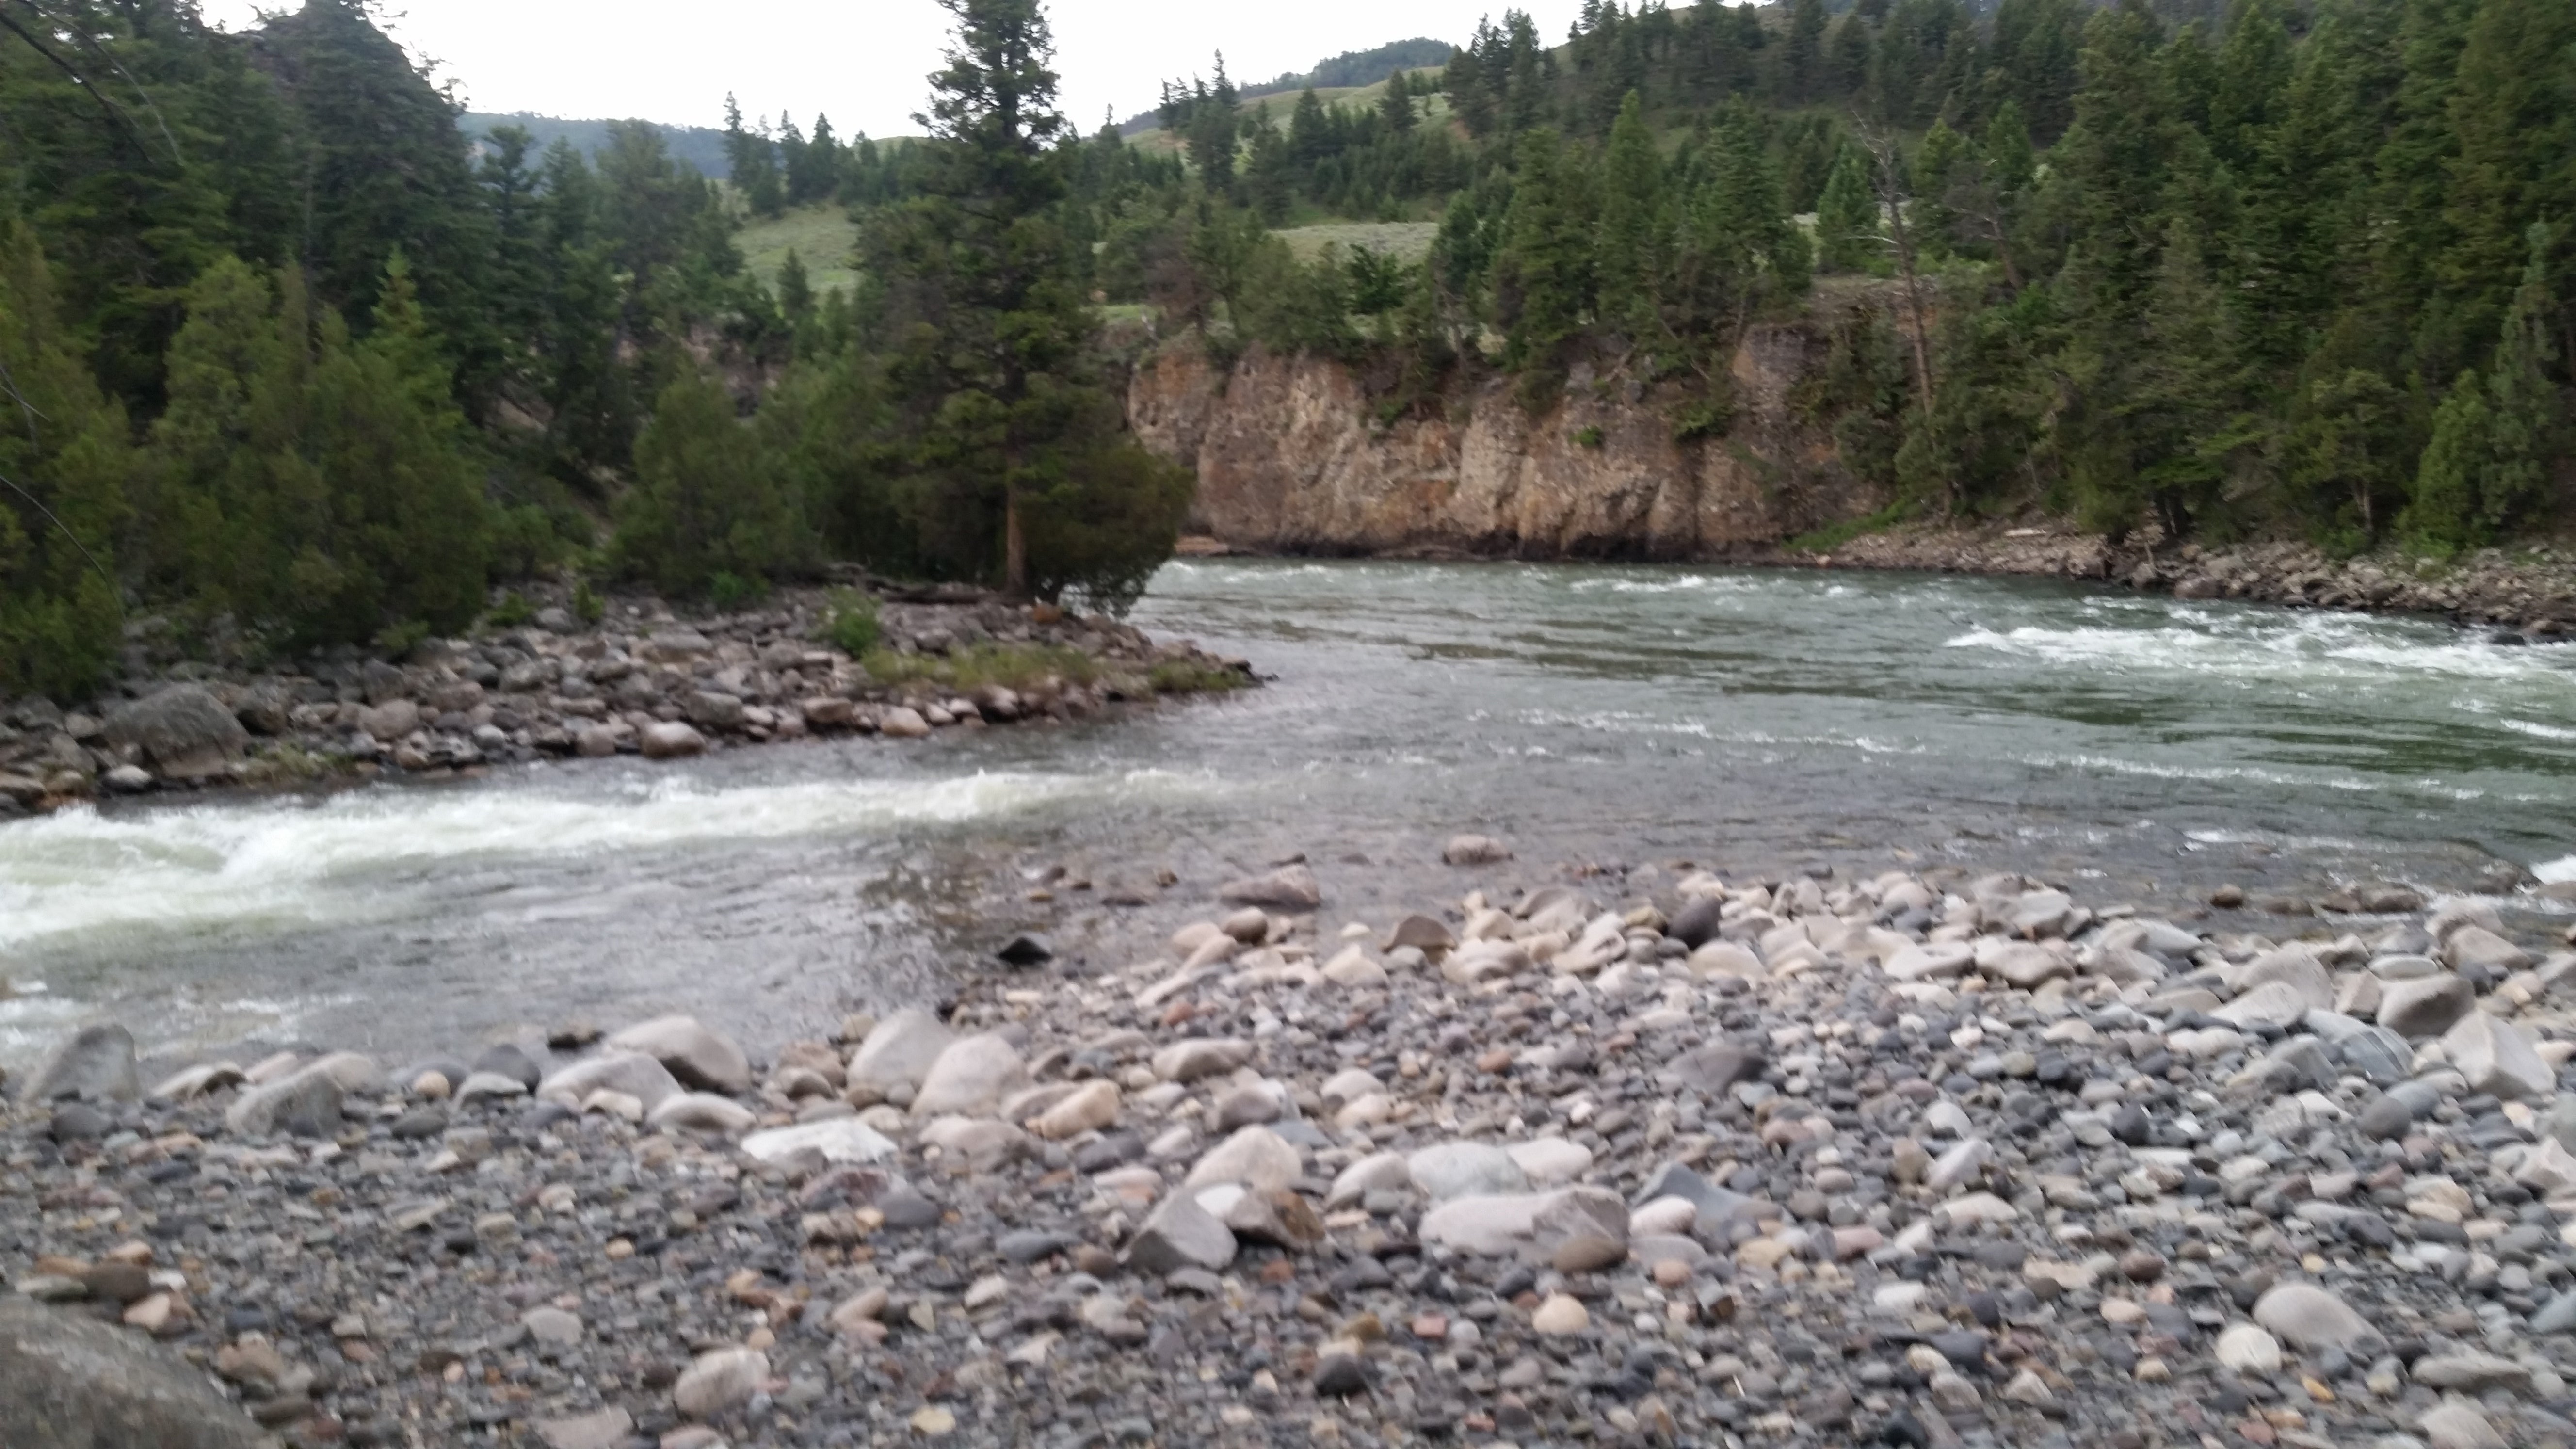 Confluence of Hell Roaring Creek (on left) and the Yellowstone River